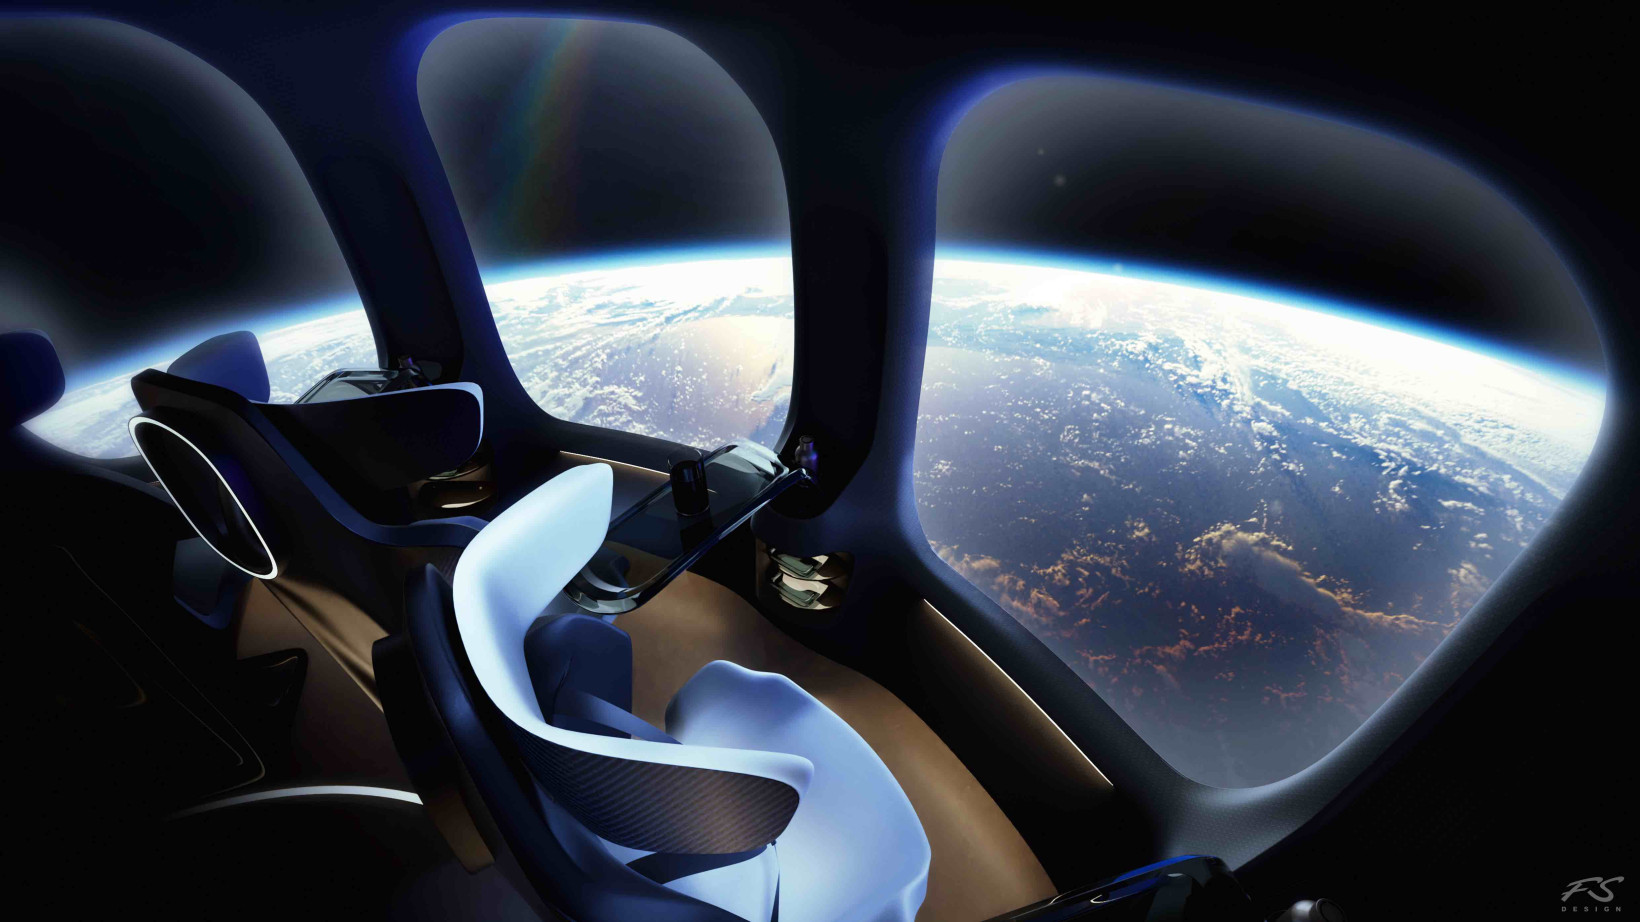 Artist's impression of the Halo space balloon's interior